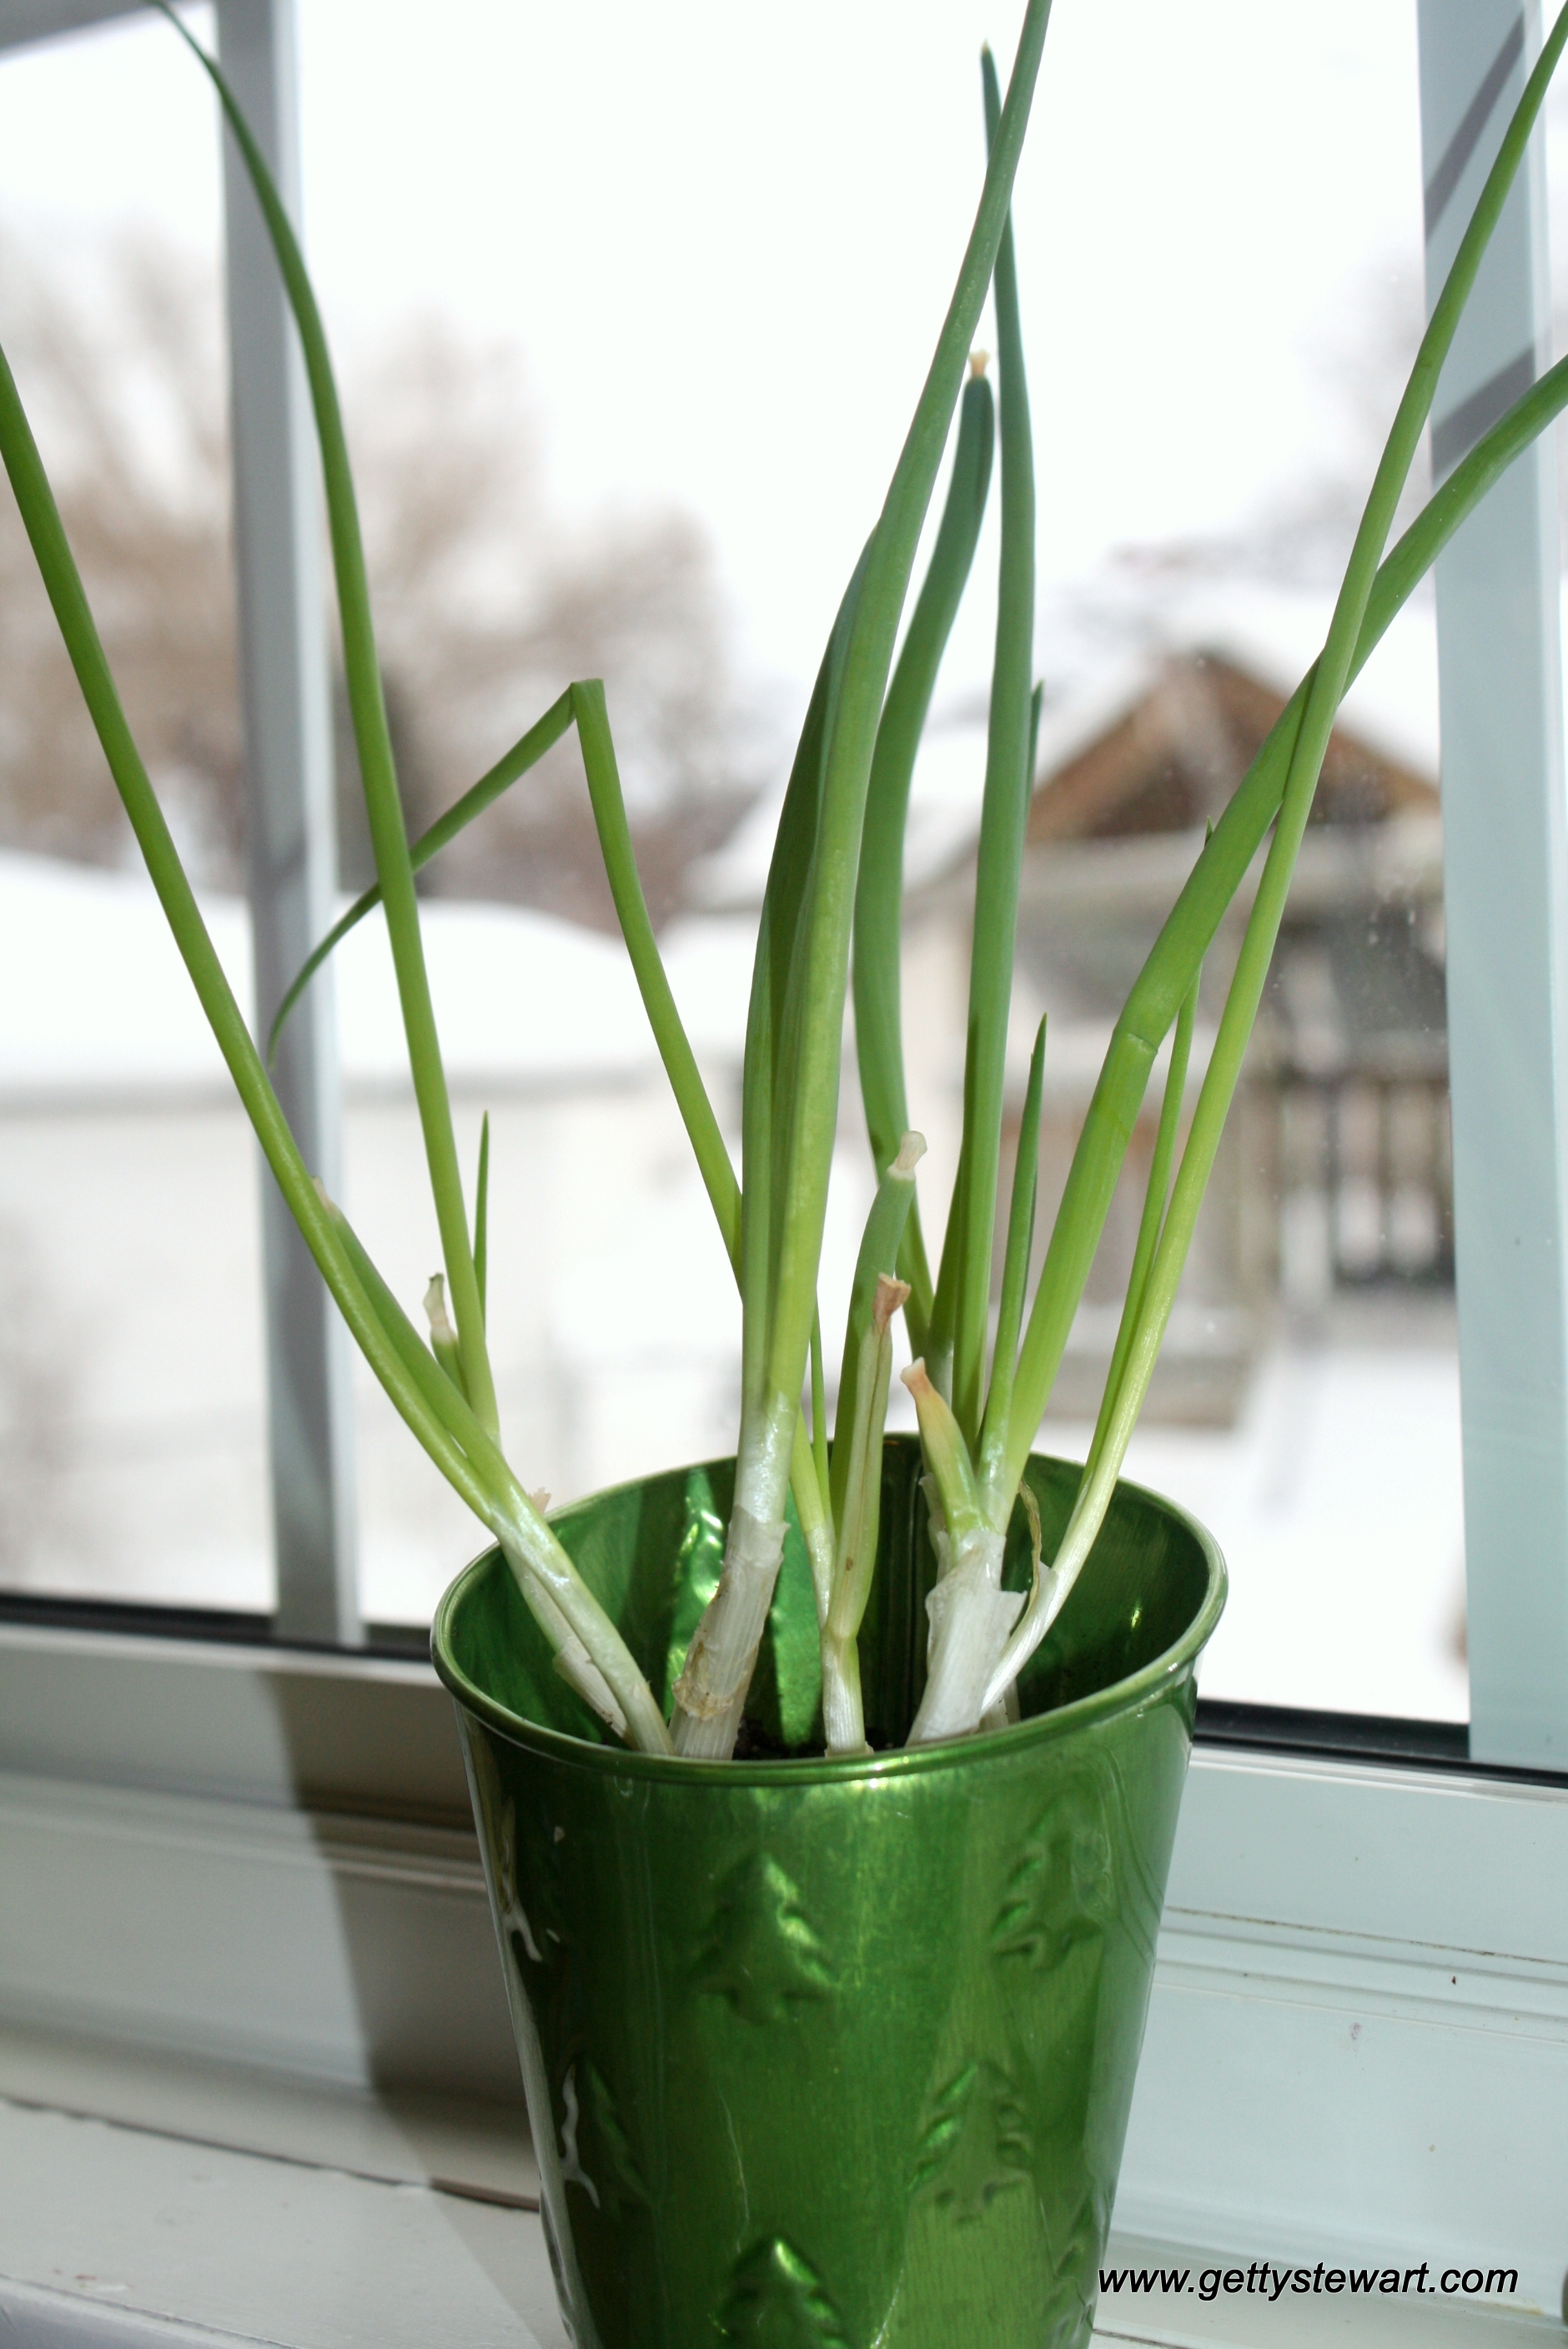 Regrowing Green Onions From The Fridge,Cellulose In Food Definition